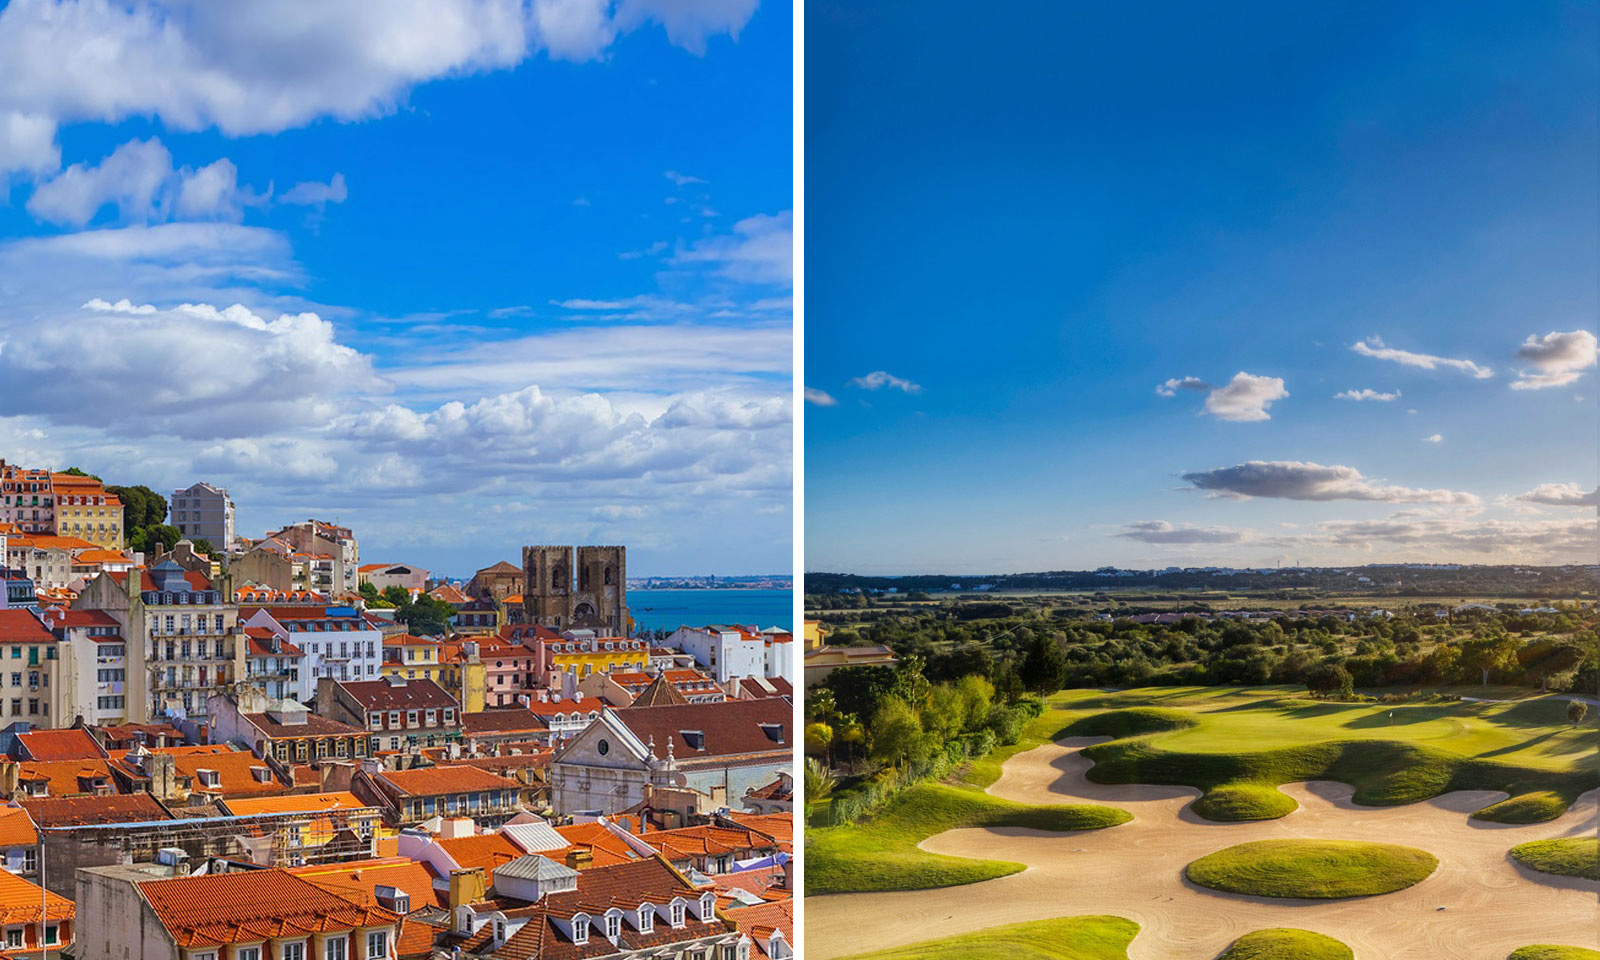 World-Golf-Awards-Recognizing-Excellence-in-Golf-Tourism-Portugal-World's-Best-Golf-Destination